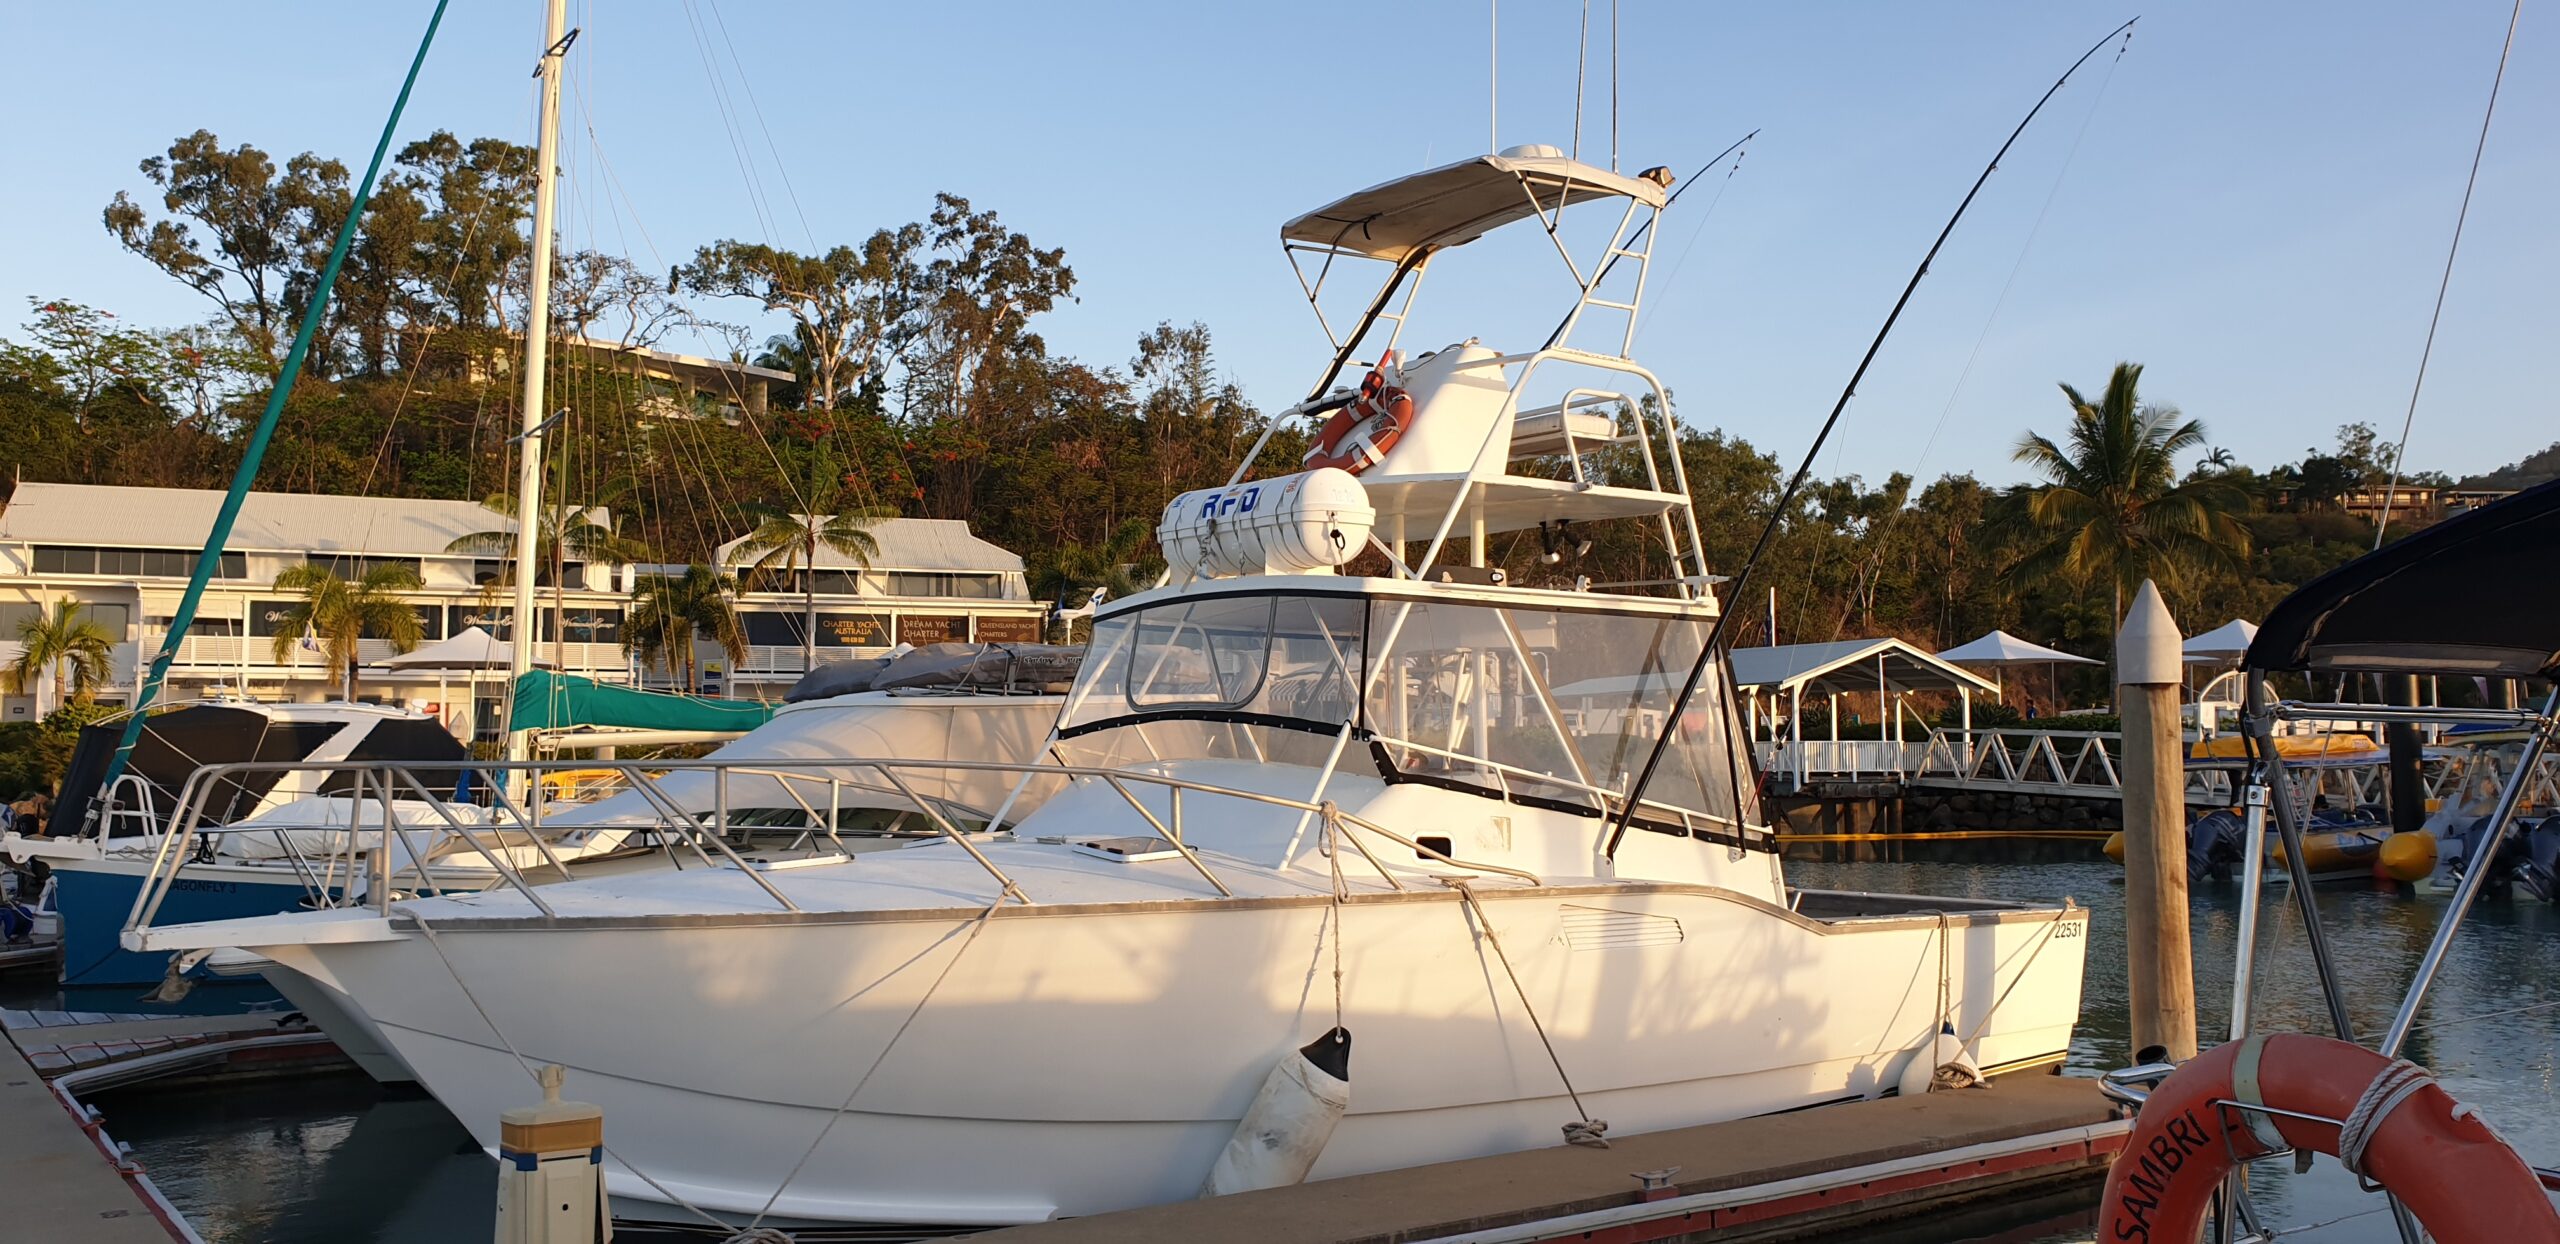 Overnight Reef Fishing Charter Whitsundays Inner Reef - Your Private Boat